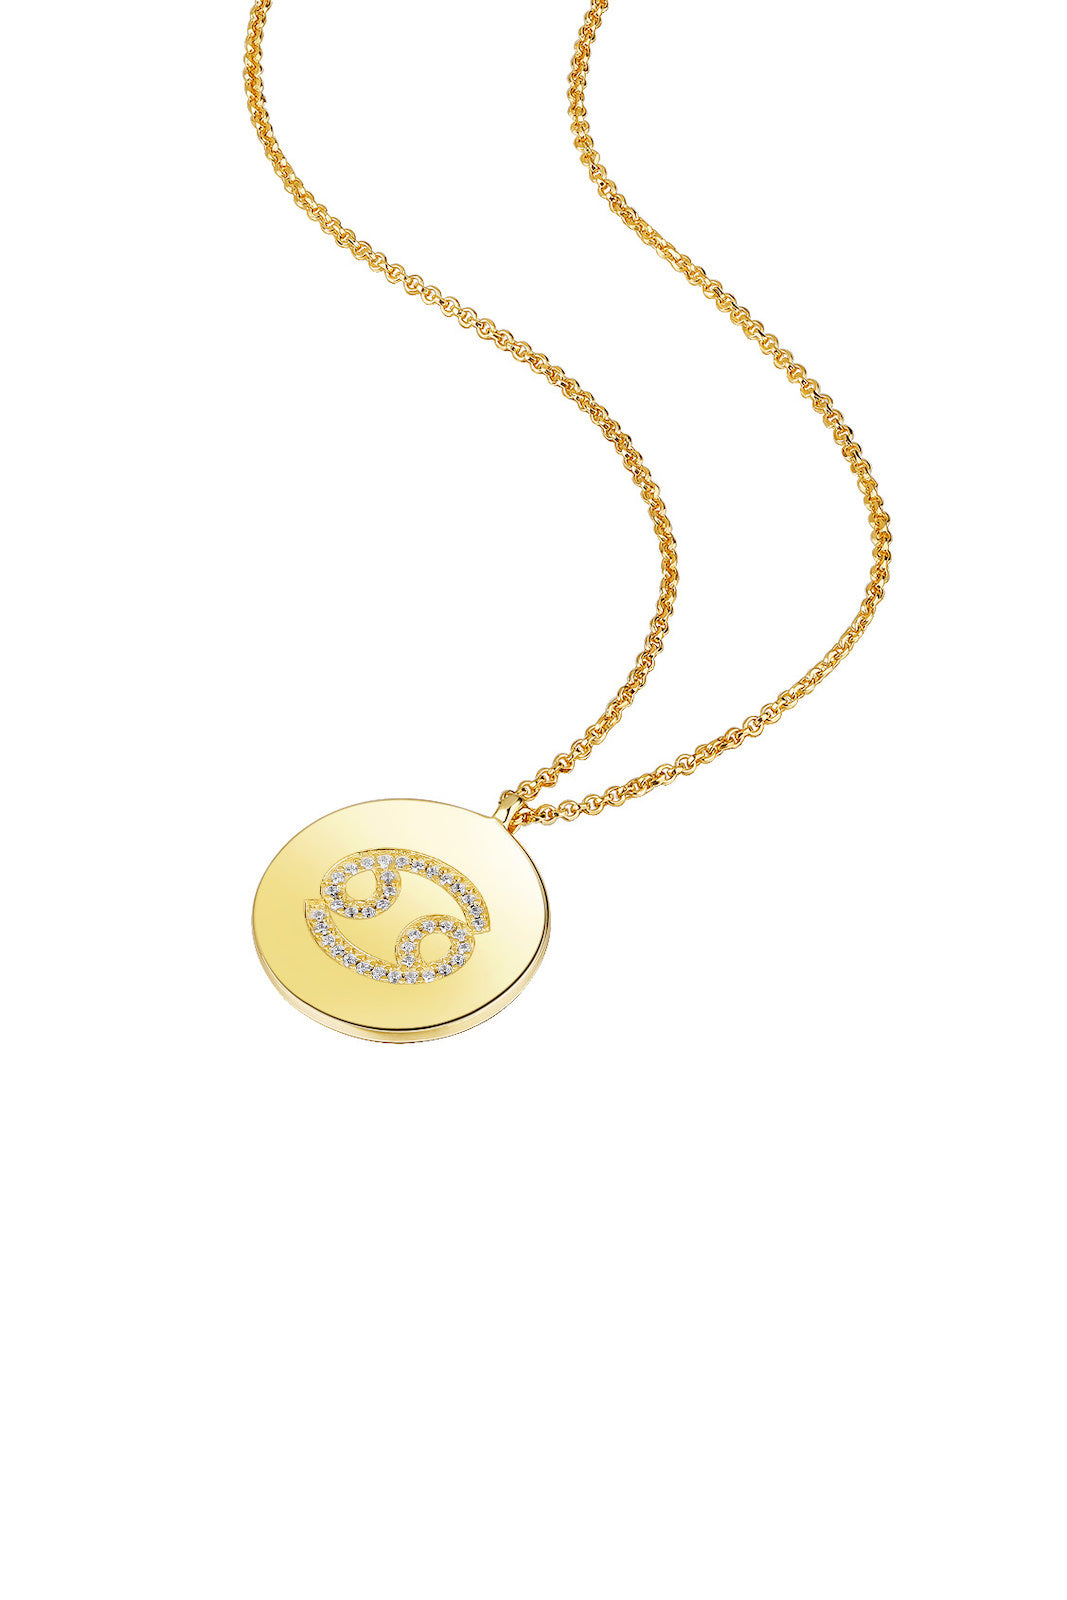 Gold Plated Silver Zodiac Necklace - Cancer Side View